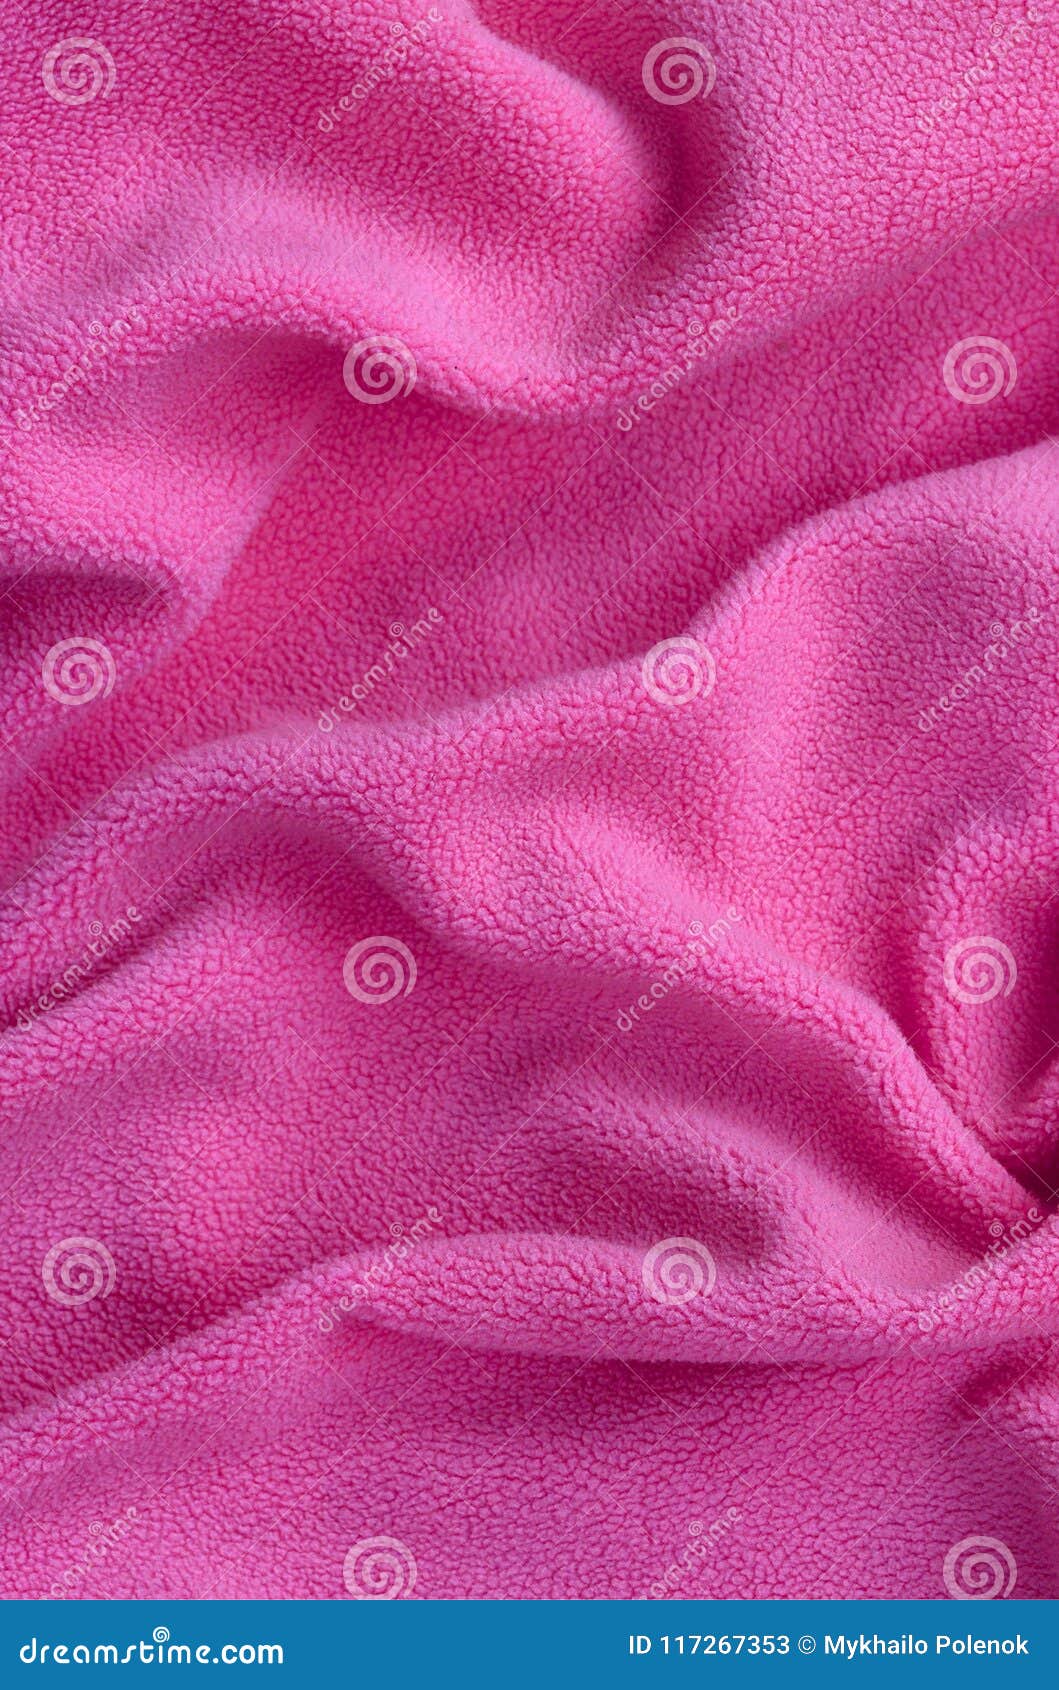 the blanket of furry pink fleece fabric. a background of light pink soft plush fleece material with a lot of relief folds